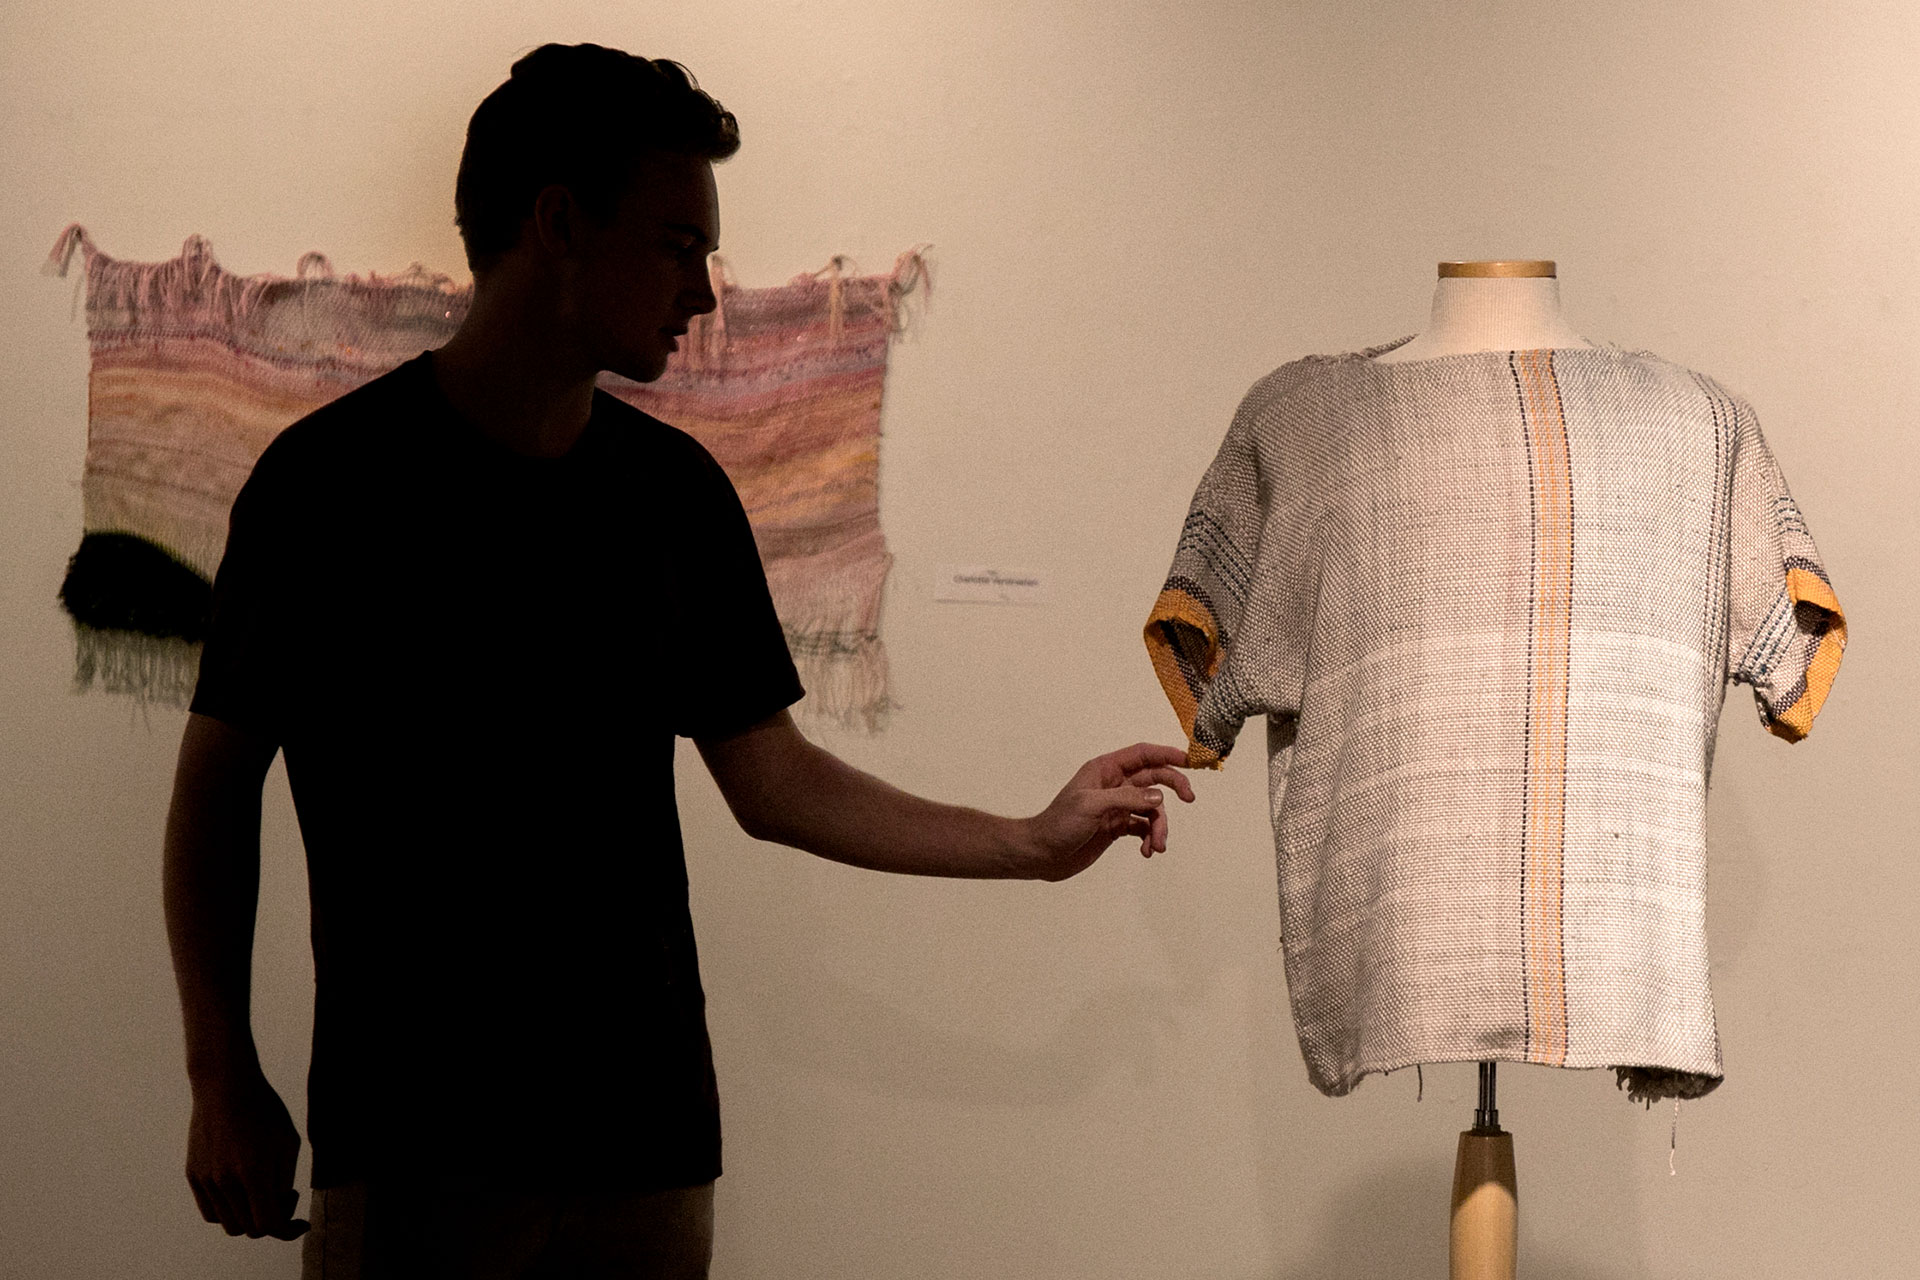 Fiber Arts student Charley Dickey '19 adjusts a shirt he completed for his course and displayed in Coburn Gallery.